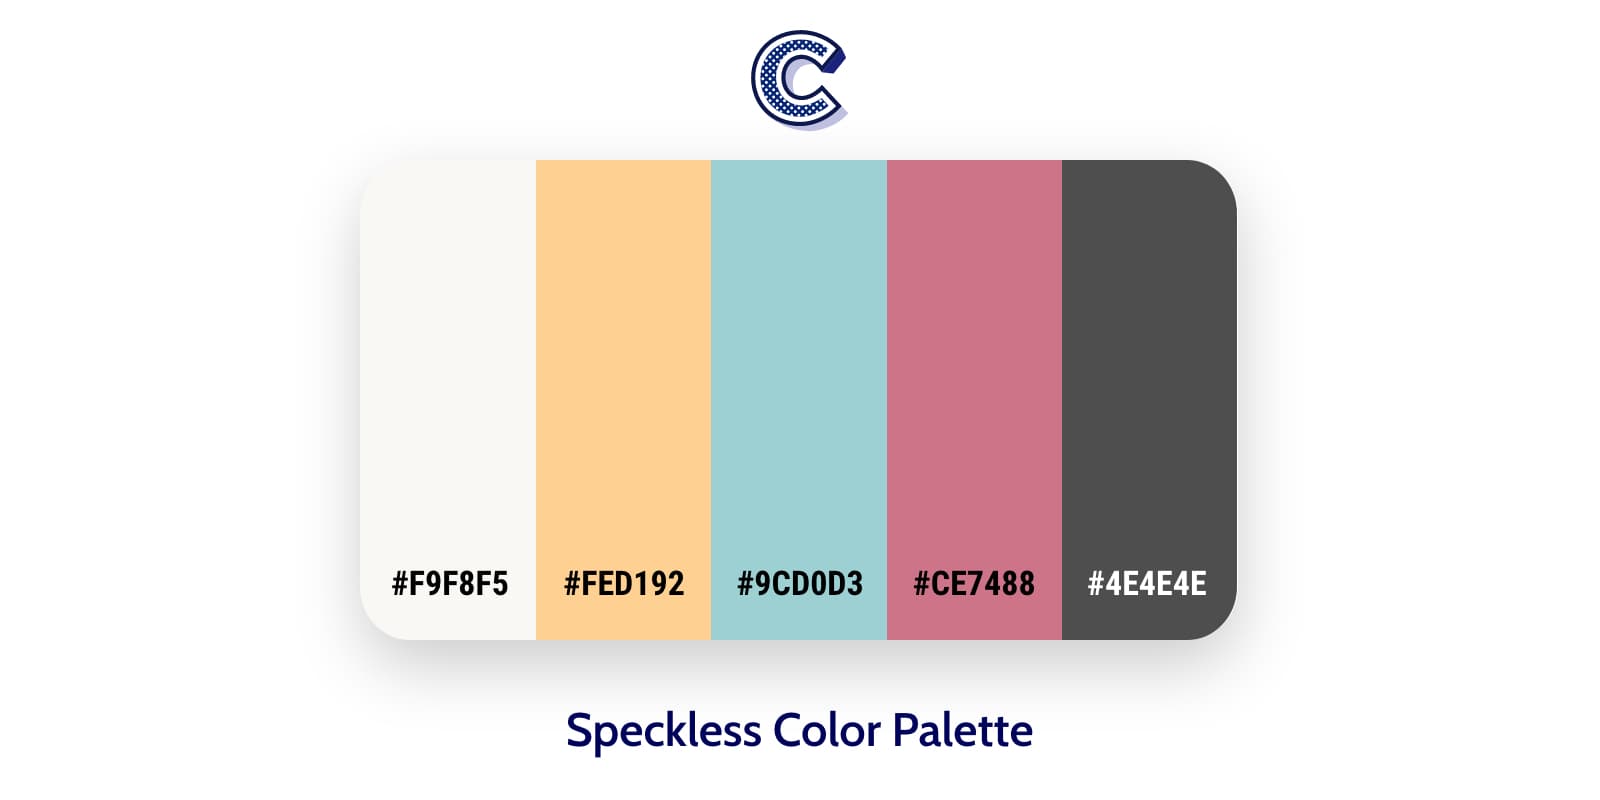 the featured image of Speckless color pallete